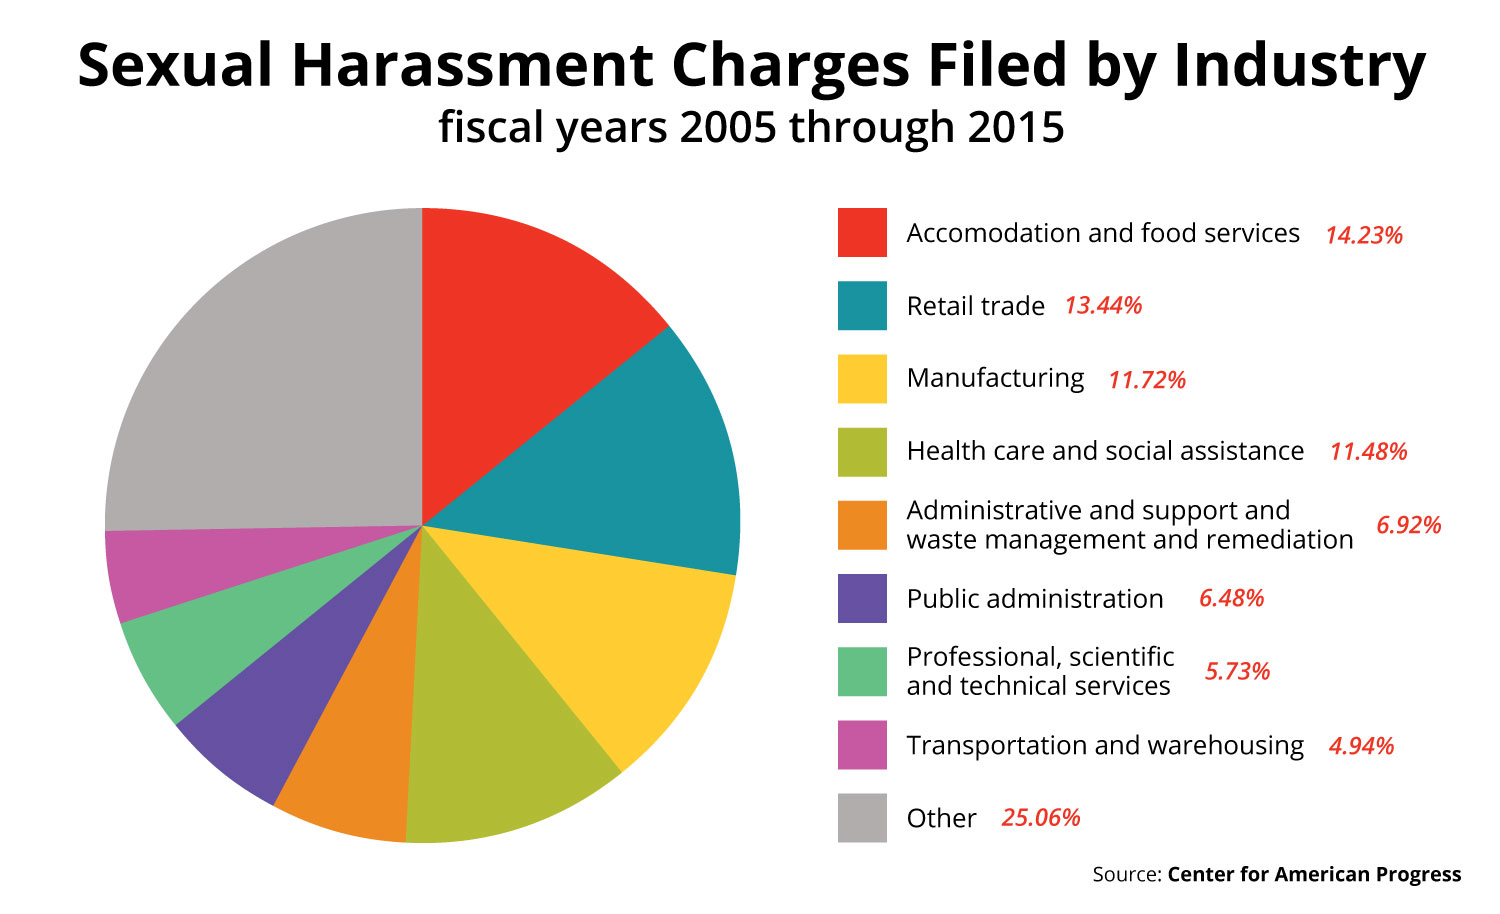 pie chart showing sexual harassment charges filed by different industries